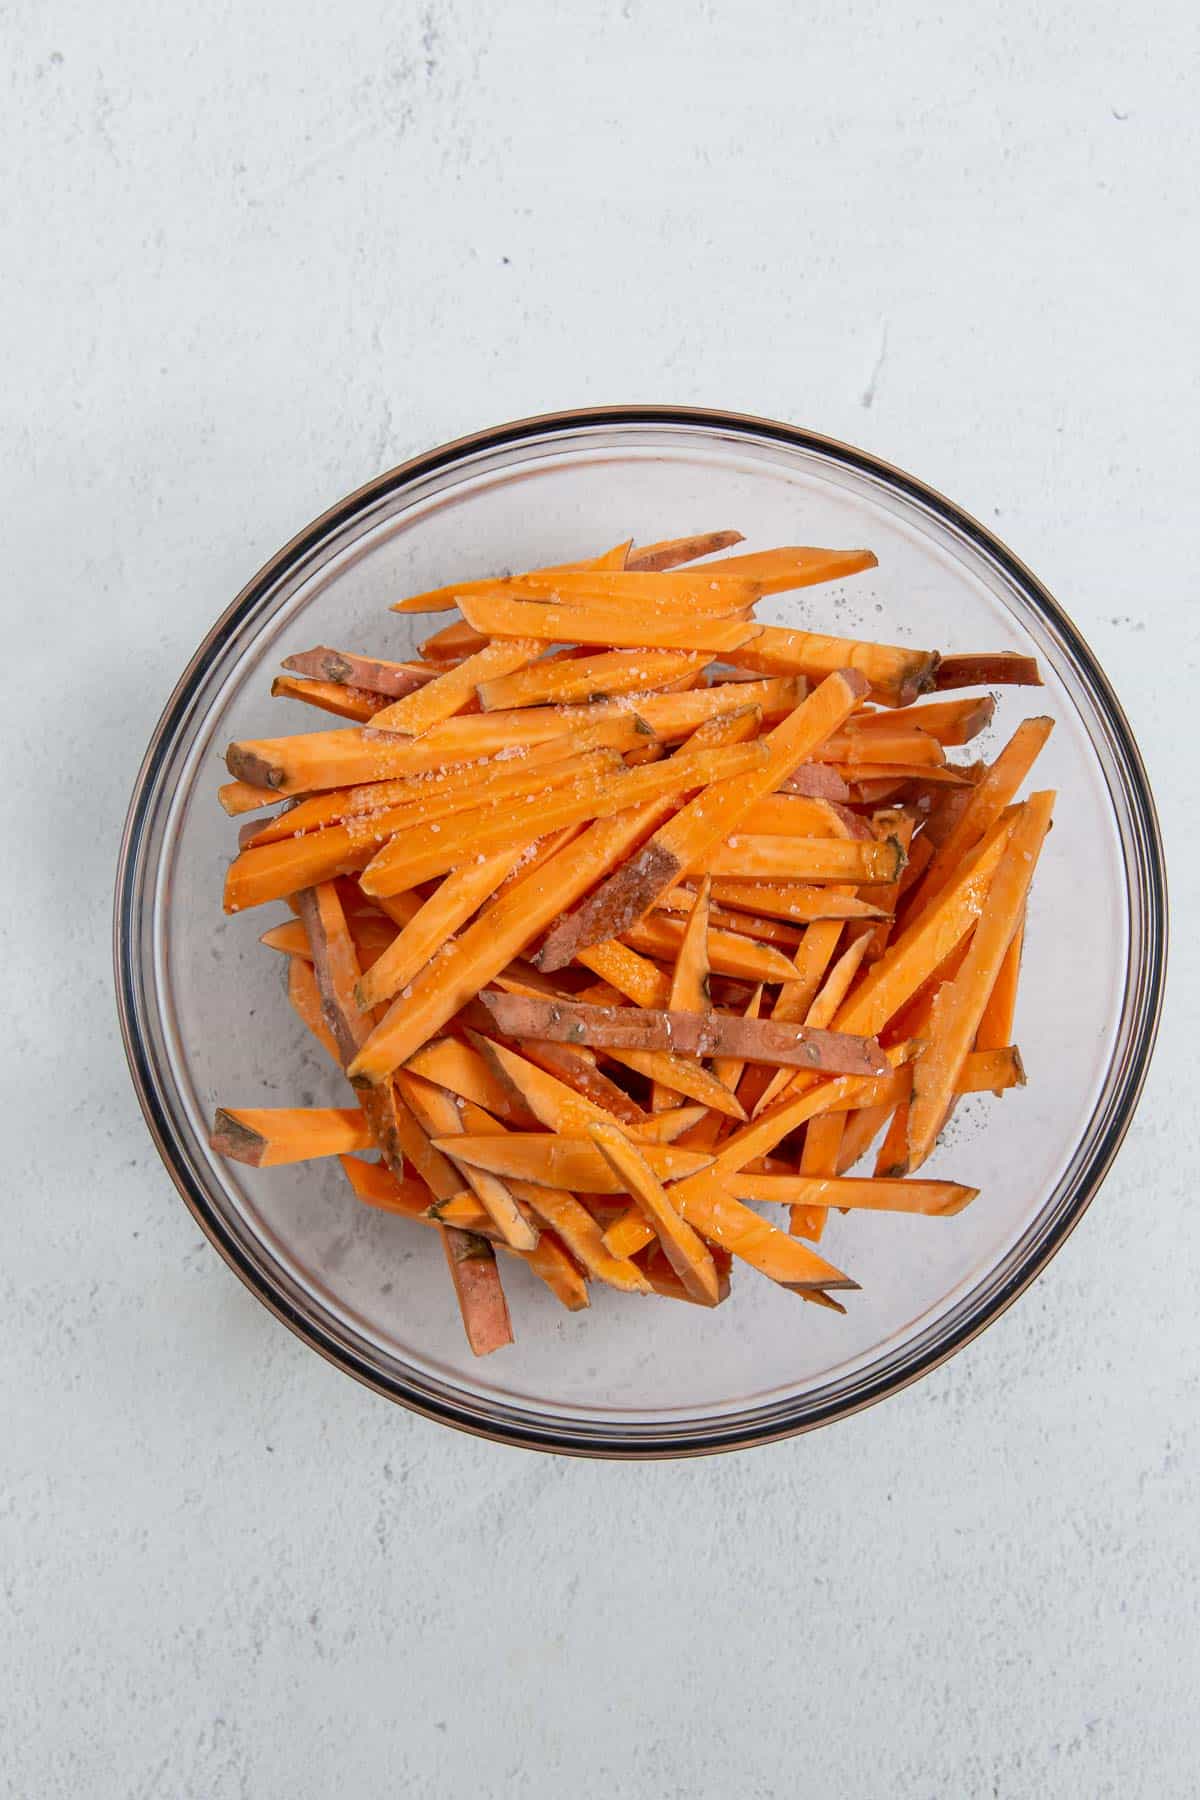 Sweet potato fries in a glass bowl on a gray background.